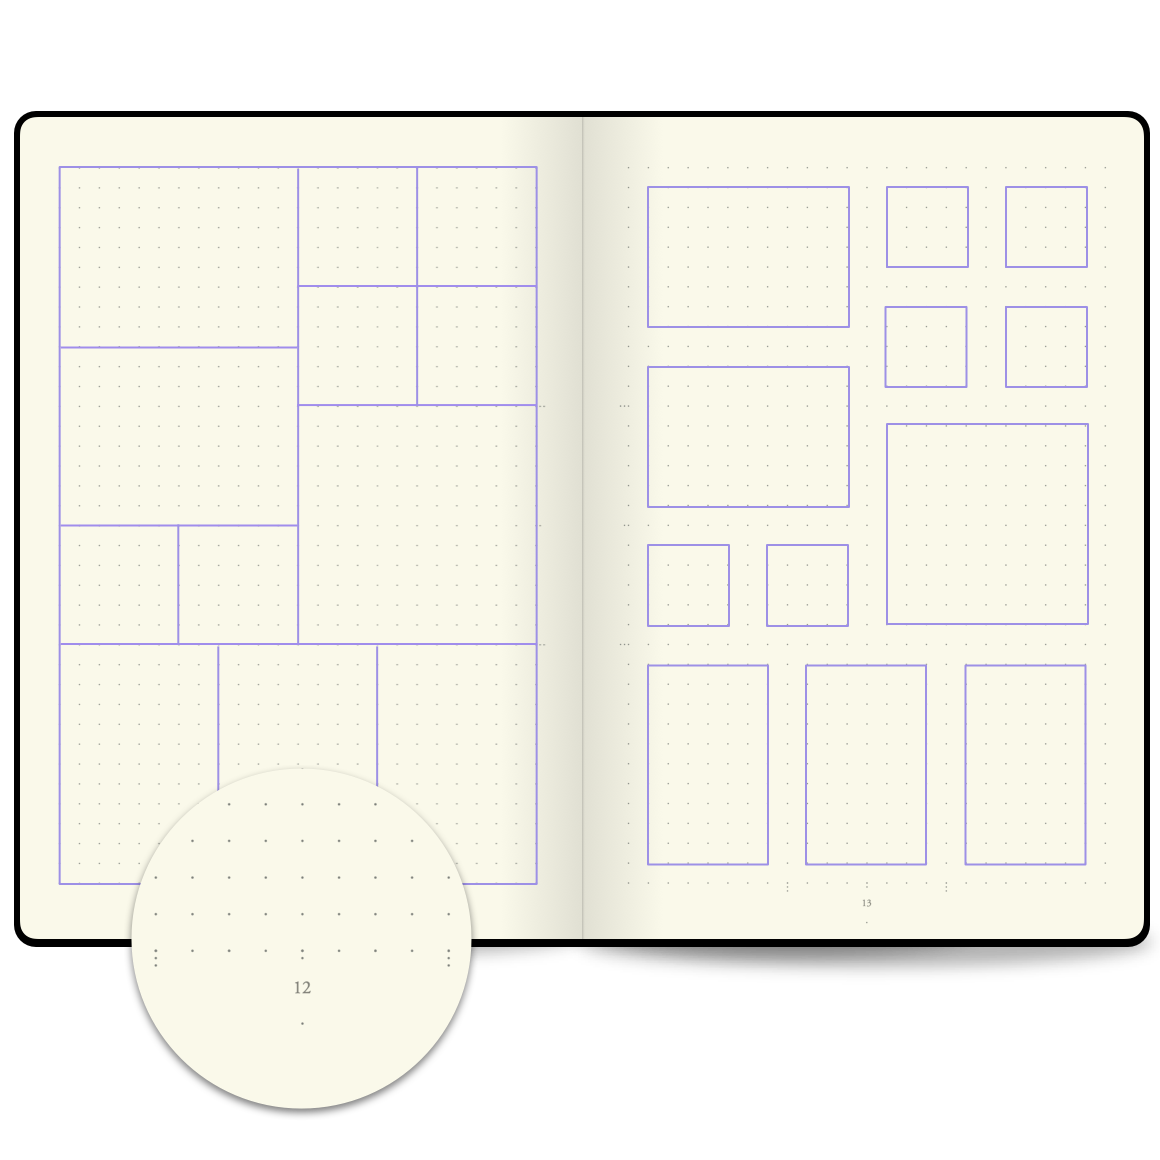 Bullet Journal Grid Spacing Guides For All Notebook Sizes